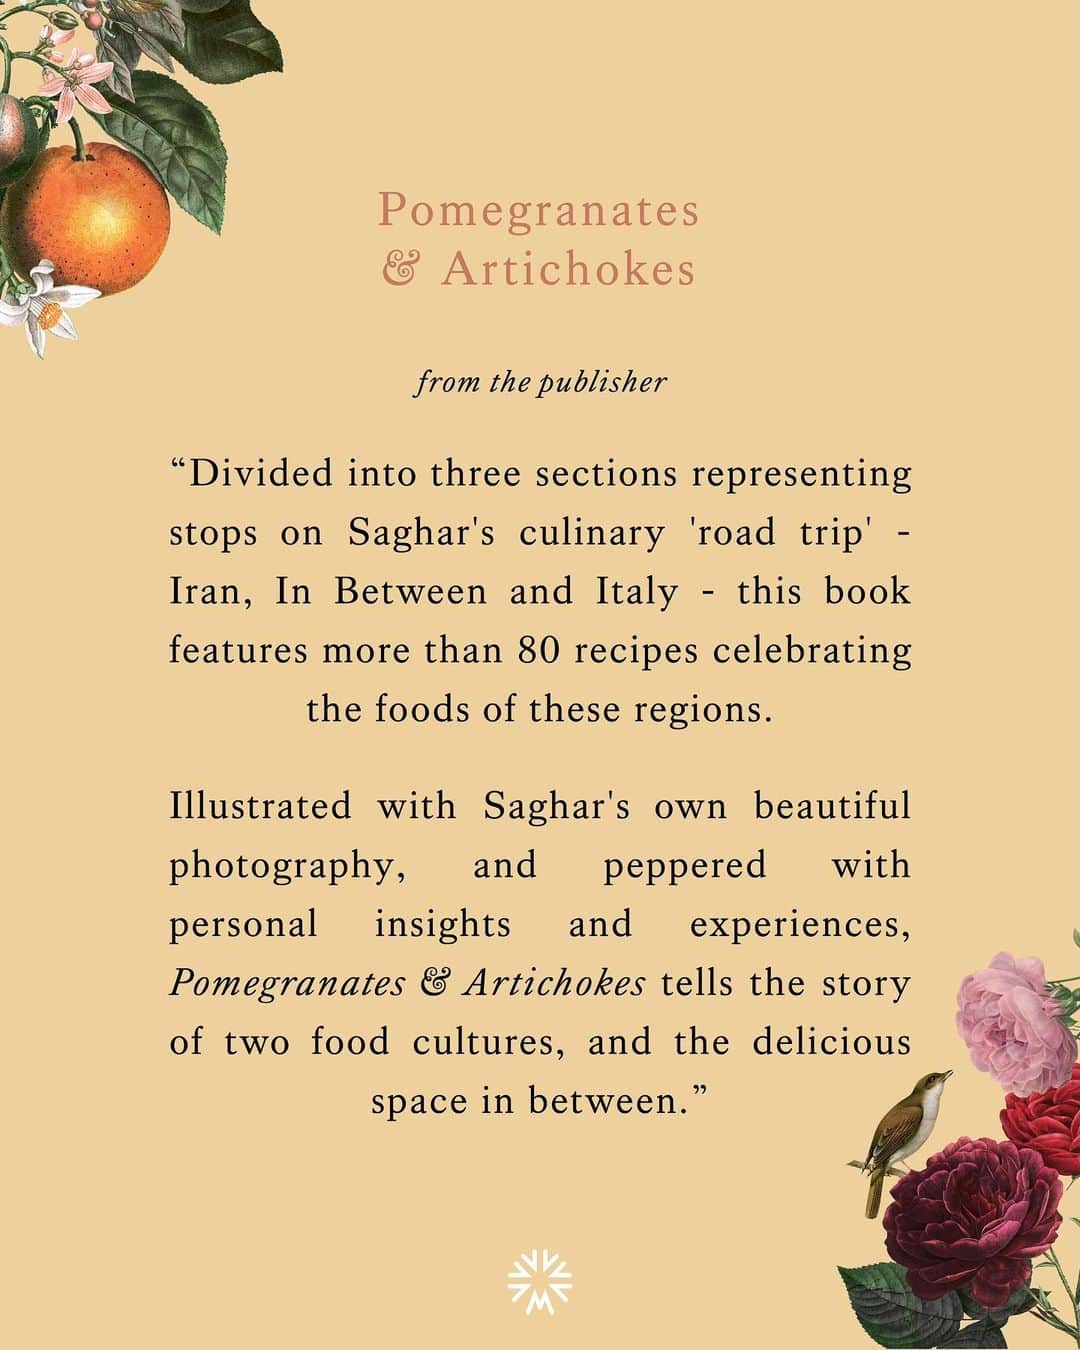 Saghar Setarehさんのインスタグラム写真 - (Saghar SetarehInstagram)「I am extremely excited, nervous, happy and proud to FINALLY present you my first cookbook; Pomegranates & Artichokes: Recipes and memories of a journey from Iran to Italy. It will be published on May 4th and it’s now available for pre-order via the link in my bio.   There are SO MANY things I have to say about this book, about its genesis in January 2017, about how I turned down no less than 3 publishing offers on books that I did not want to write, because I knew I wanted to write specifically THIS book, and about its arduous road to publication. But these are stories for another time.  Pomegranates & Artichokes is not a cookbook about an “exotice Persia”, from the point of view of a nostalgic exile. Nor is it a cookbook about the dolce vita in Italy. It’s a journey, that starts in Iran, then travels west through the Levant and the Eastern Mediterranean, finally arriving in Italy. It’s a quest for things that link the people of these lands, rather than separate them. Recipes, ingredients, techniques, stories. You'll be amazed at the amount of similarities between these apparently distant cultures and their cuisine.   Over and over again the question of borders and freedom of movement is raised throughout the book, for in fact, more than anything Pomegranates & Artichokes is about migrations.  Consequently, it’s also a book about identity.   It is divided into three chapters: Iran, In Between, and Italy. Each starts with an essay and its own pantry section. The recipes are accompanied by historical facts, personal anecdotes and insights.  To get in the mood of Pomegranates & Artichokes, I have also curated a playlist that follows the same pattern: Iran, In Between and Italy that you find in the link in bio  Lastly, if you want to support me and my work, please pre-order the book. It’s a huge deal in this market, especially for first-time authors like me.   Best team ever:  Recipe testing assistant/angel: @grassnbones  Home economist @alice.adamscarosi with help from @bettirosso  Photography and styling assistant: @valentinahortus  Location @madonnellagricola  And everyone at @murdochbooks_uk   #PomegranatesAndArtichokes #LabNoonCookbook」2月4日 17時17分 - labnoon